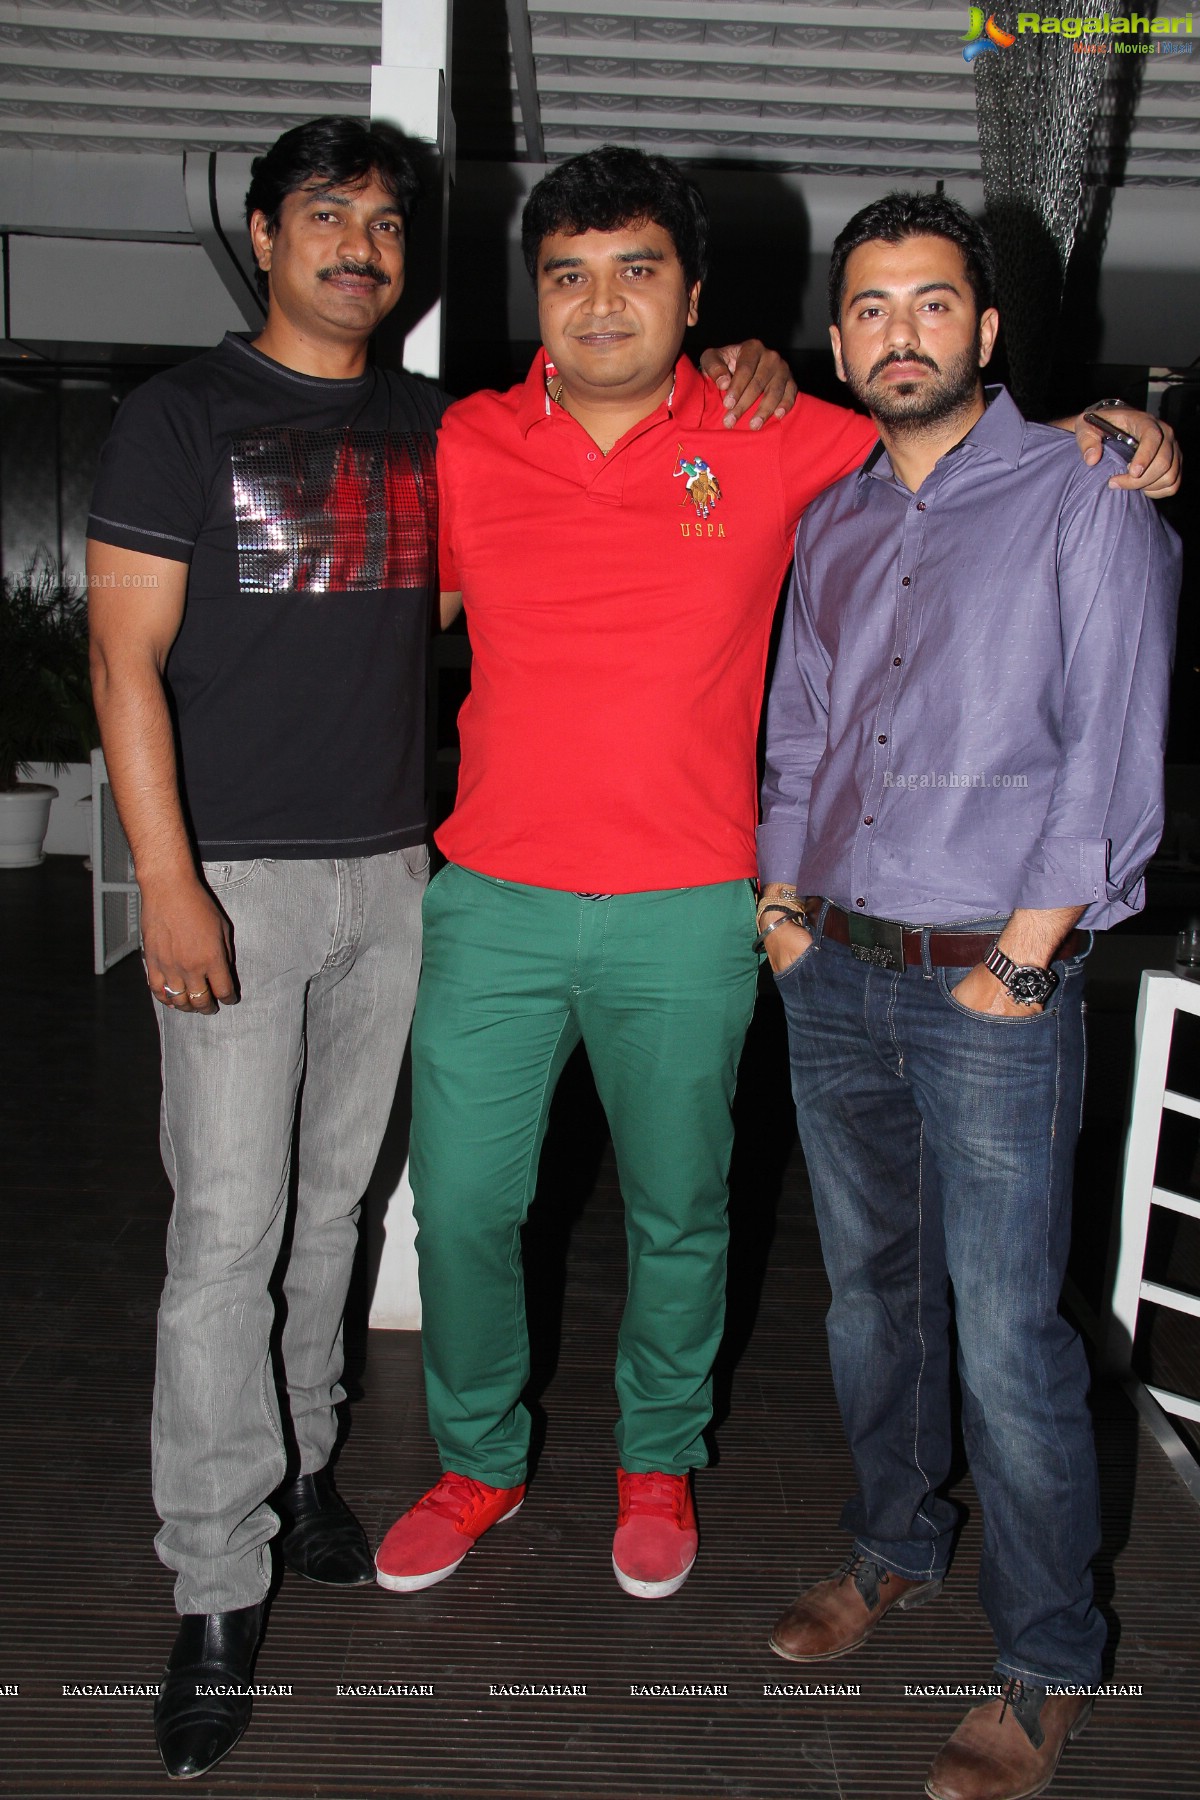 KK, RK and BNI Group Party at Tabla Terrace, Hyderabad